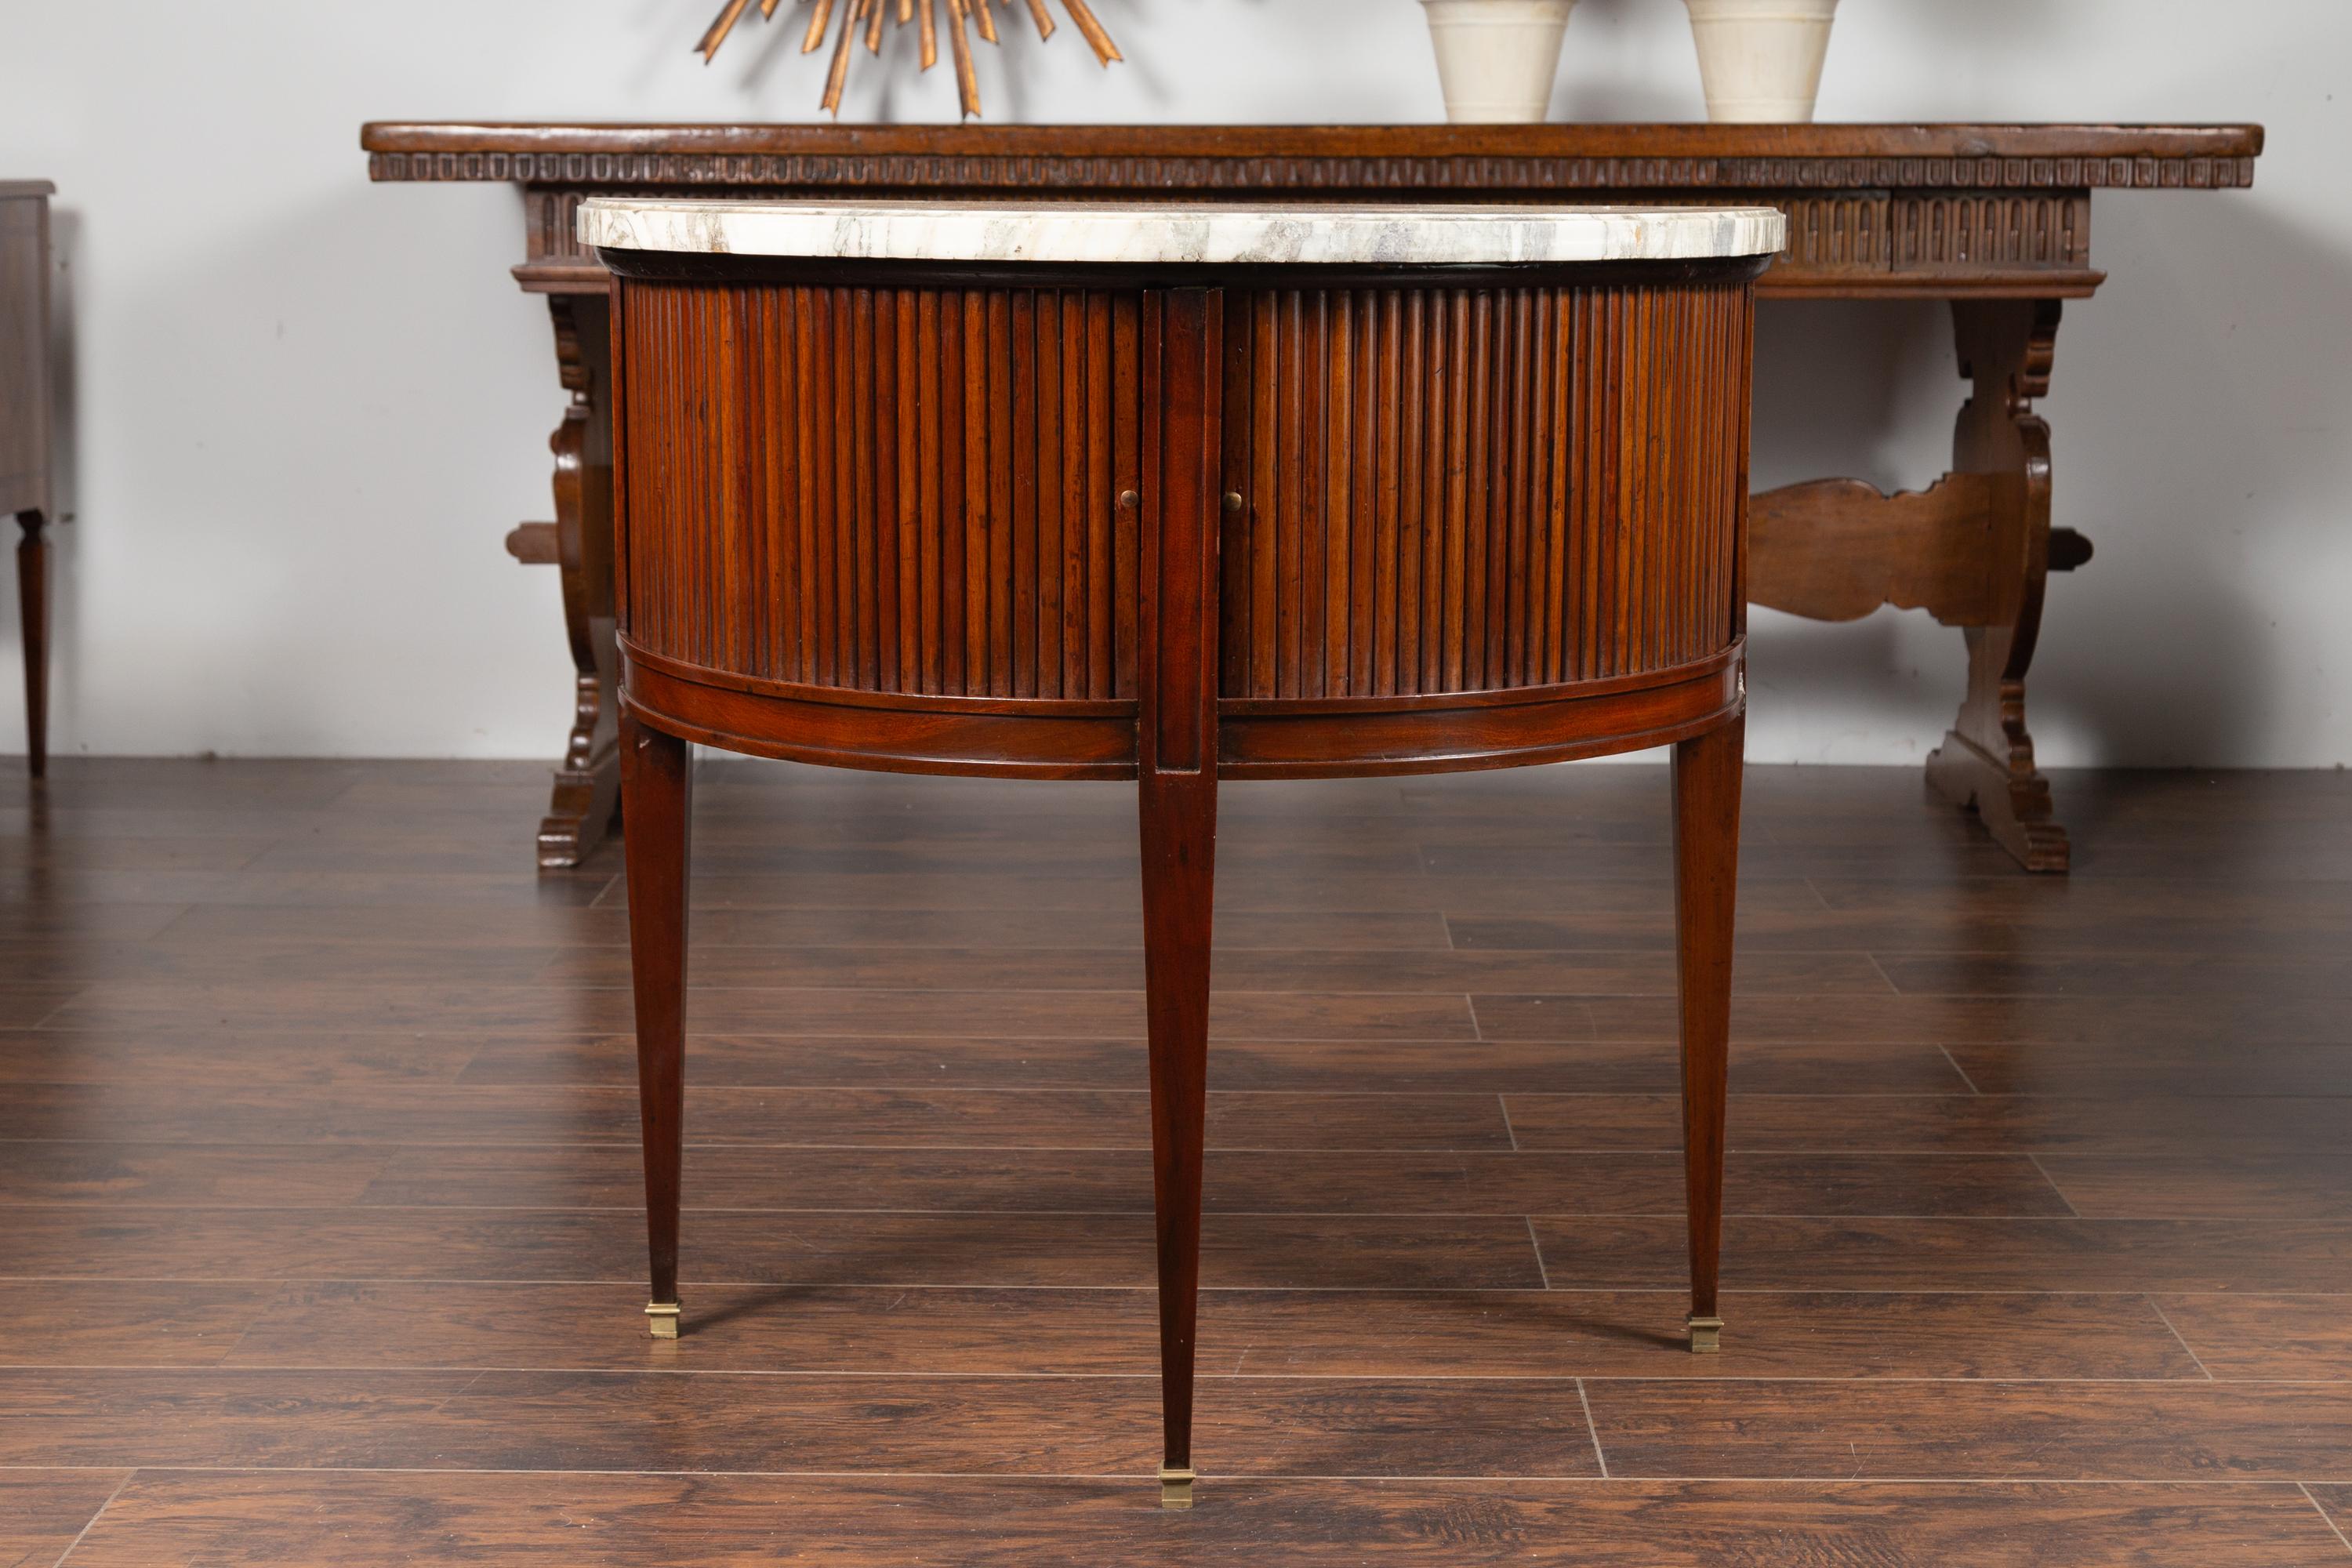 An English mahogany demilune cabinet from the mid-19th century, with reeded sliding doors and marble top. Born in England during the third quarter of the 19th century, this handsome demilune cabinet features a semi-circular variegated marble top